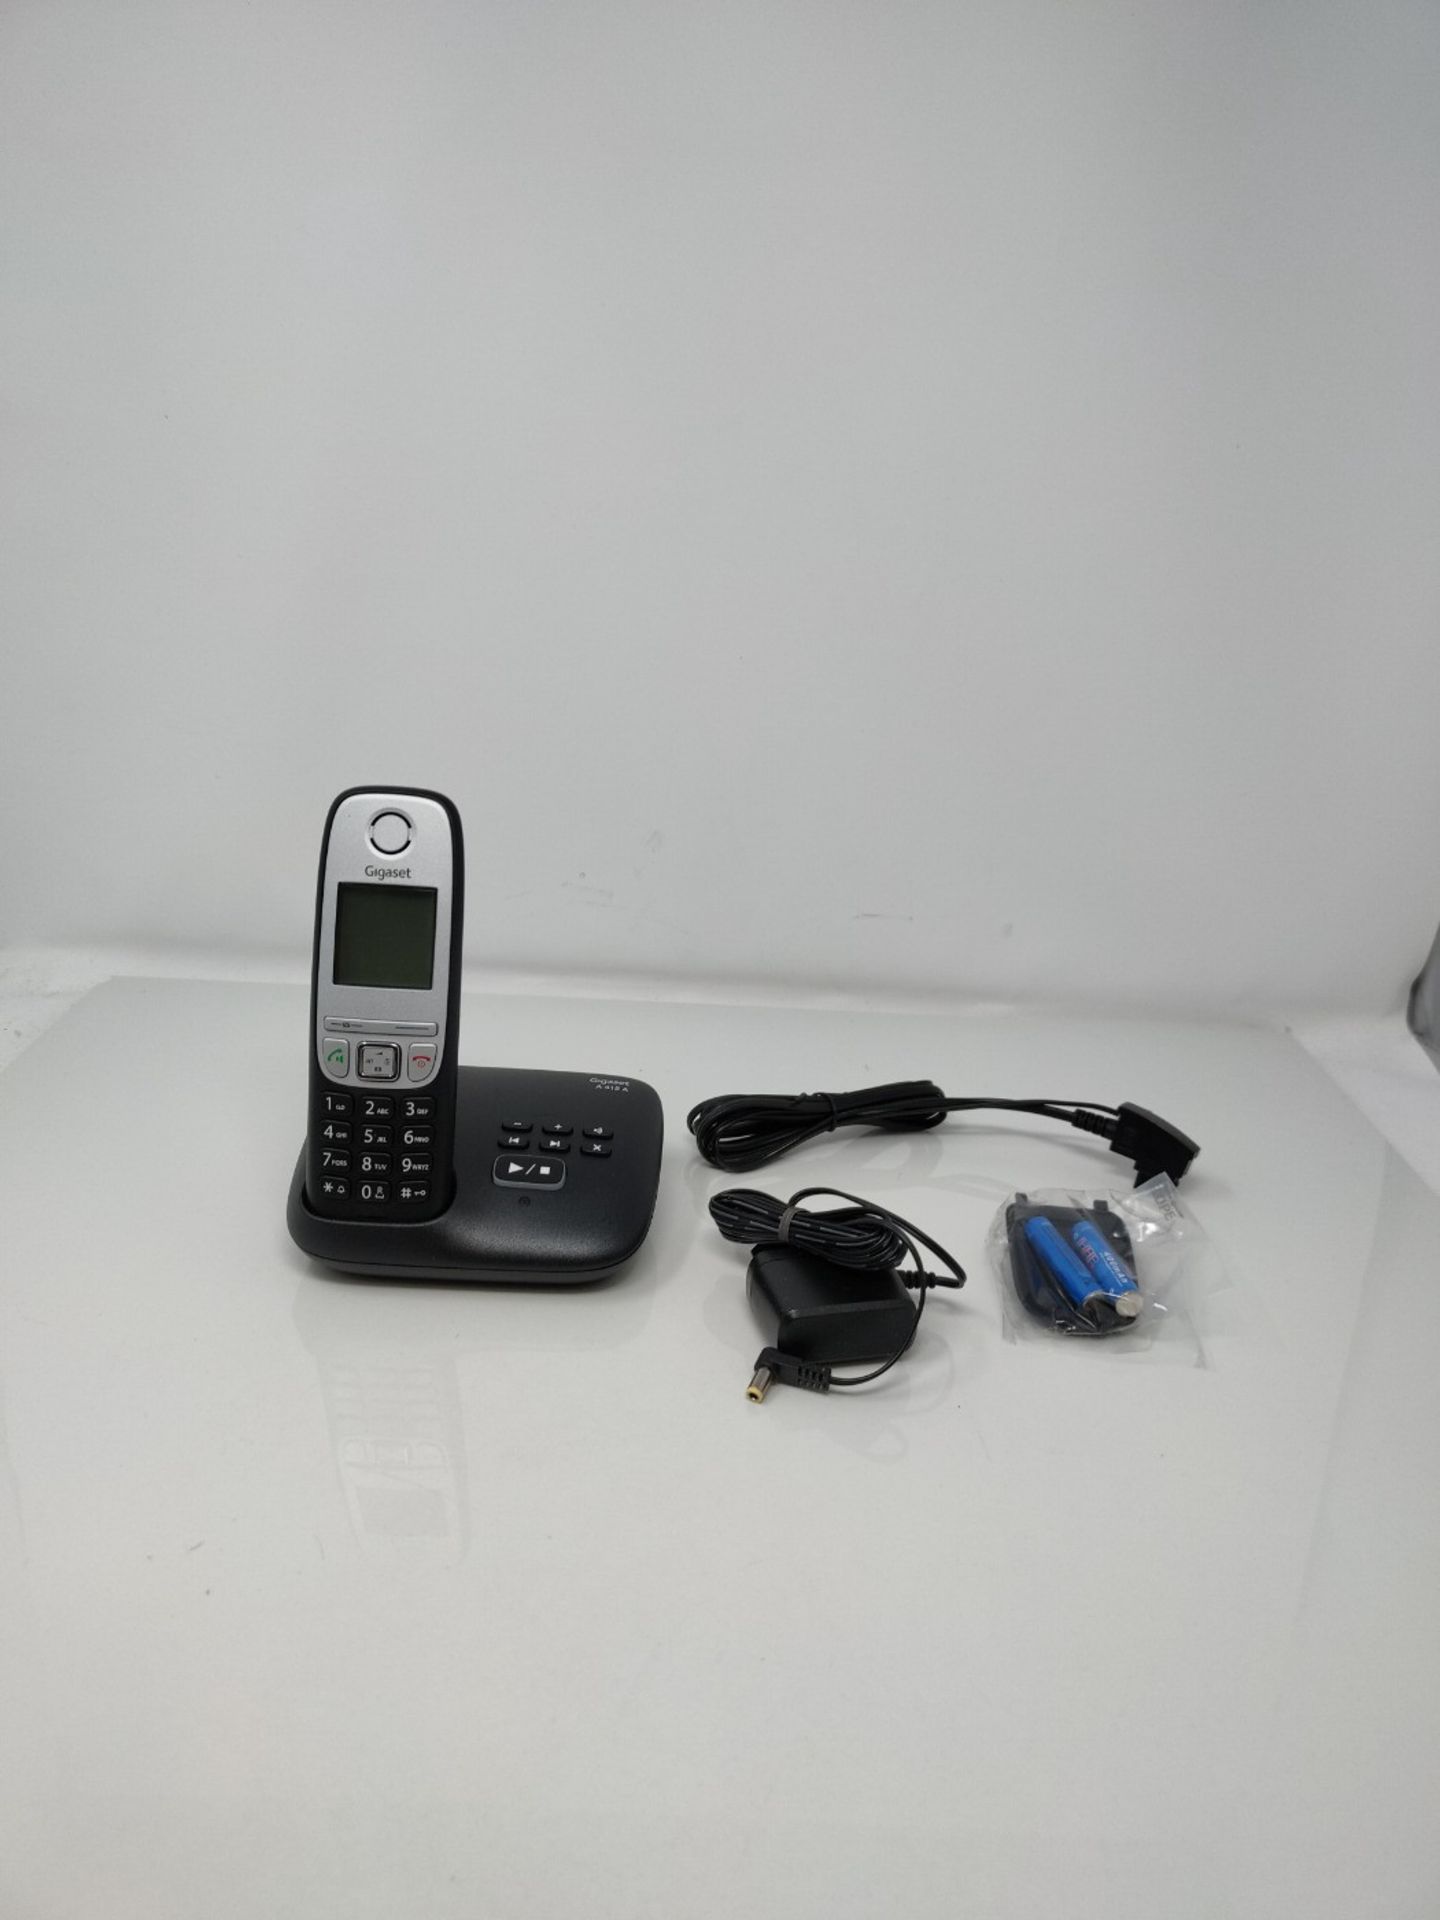 Gigaset A415A, cordless telephone DECT with answering machine, hands-free function, sp - Image 3 of 3